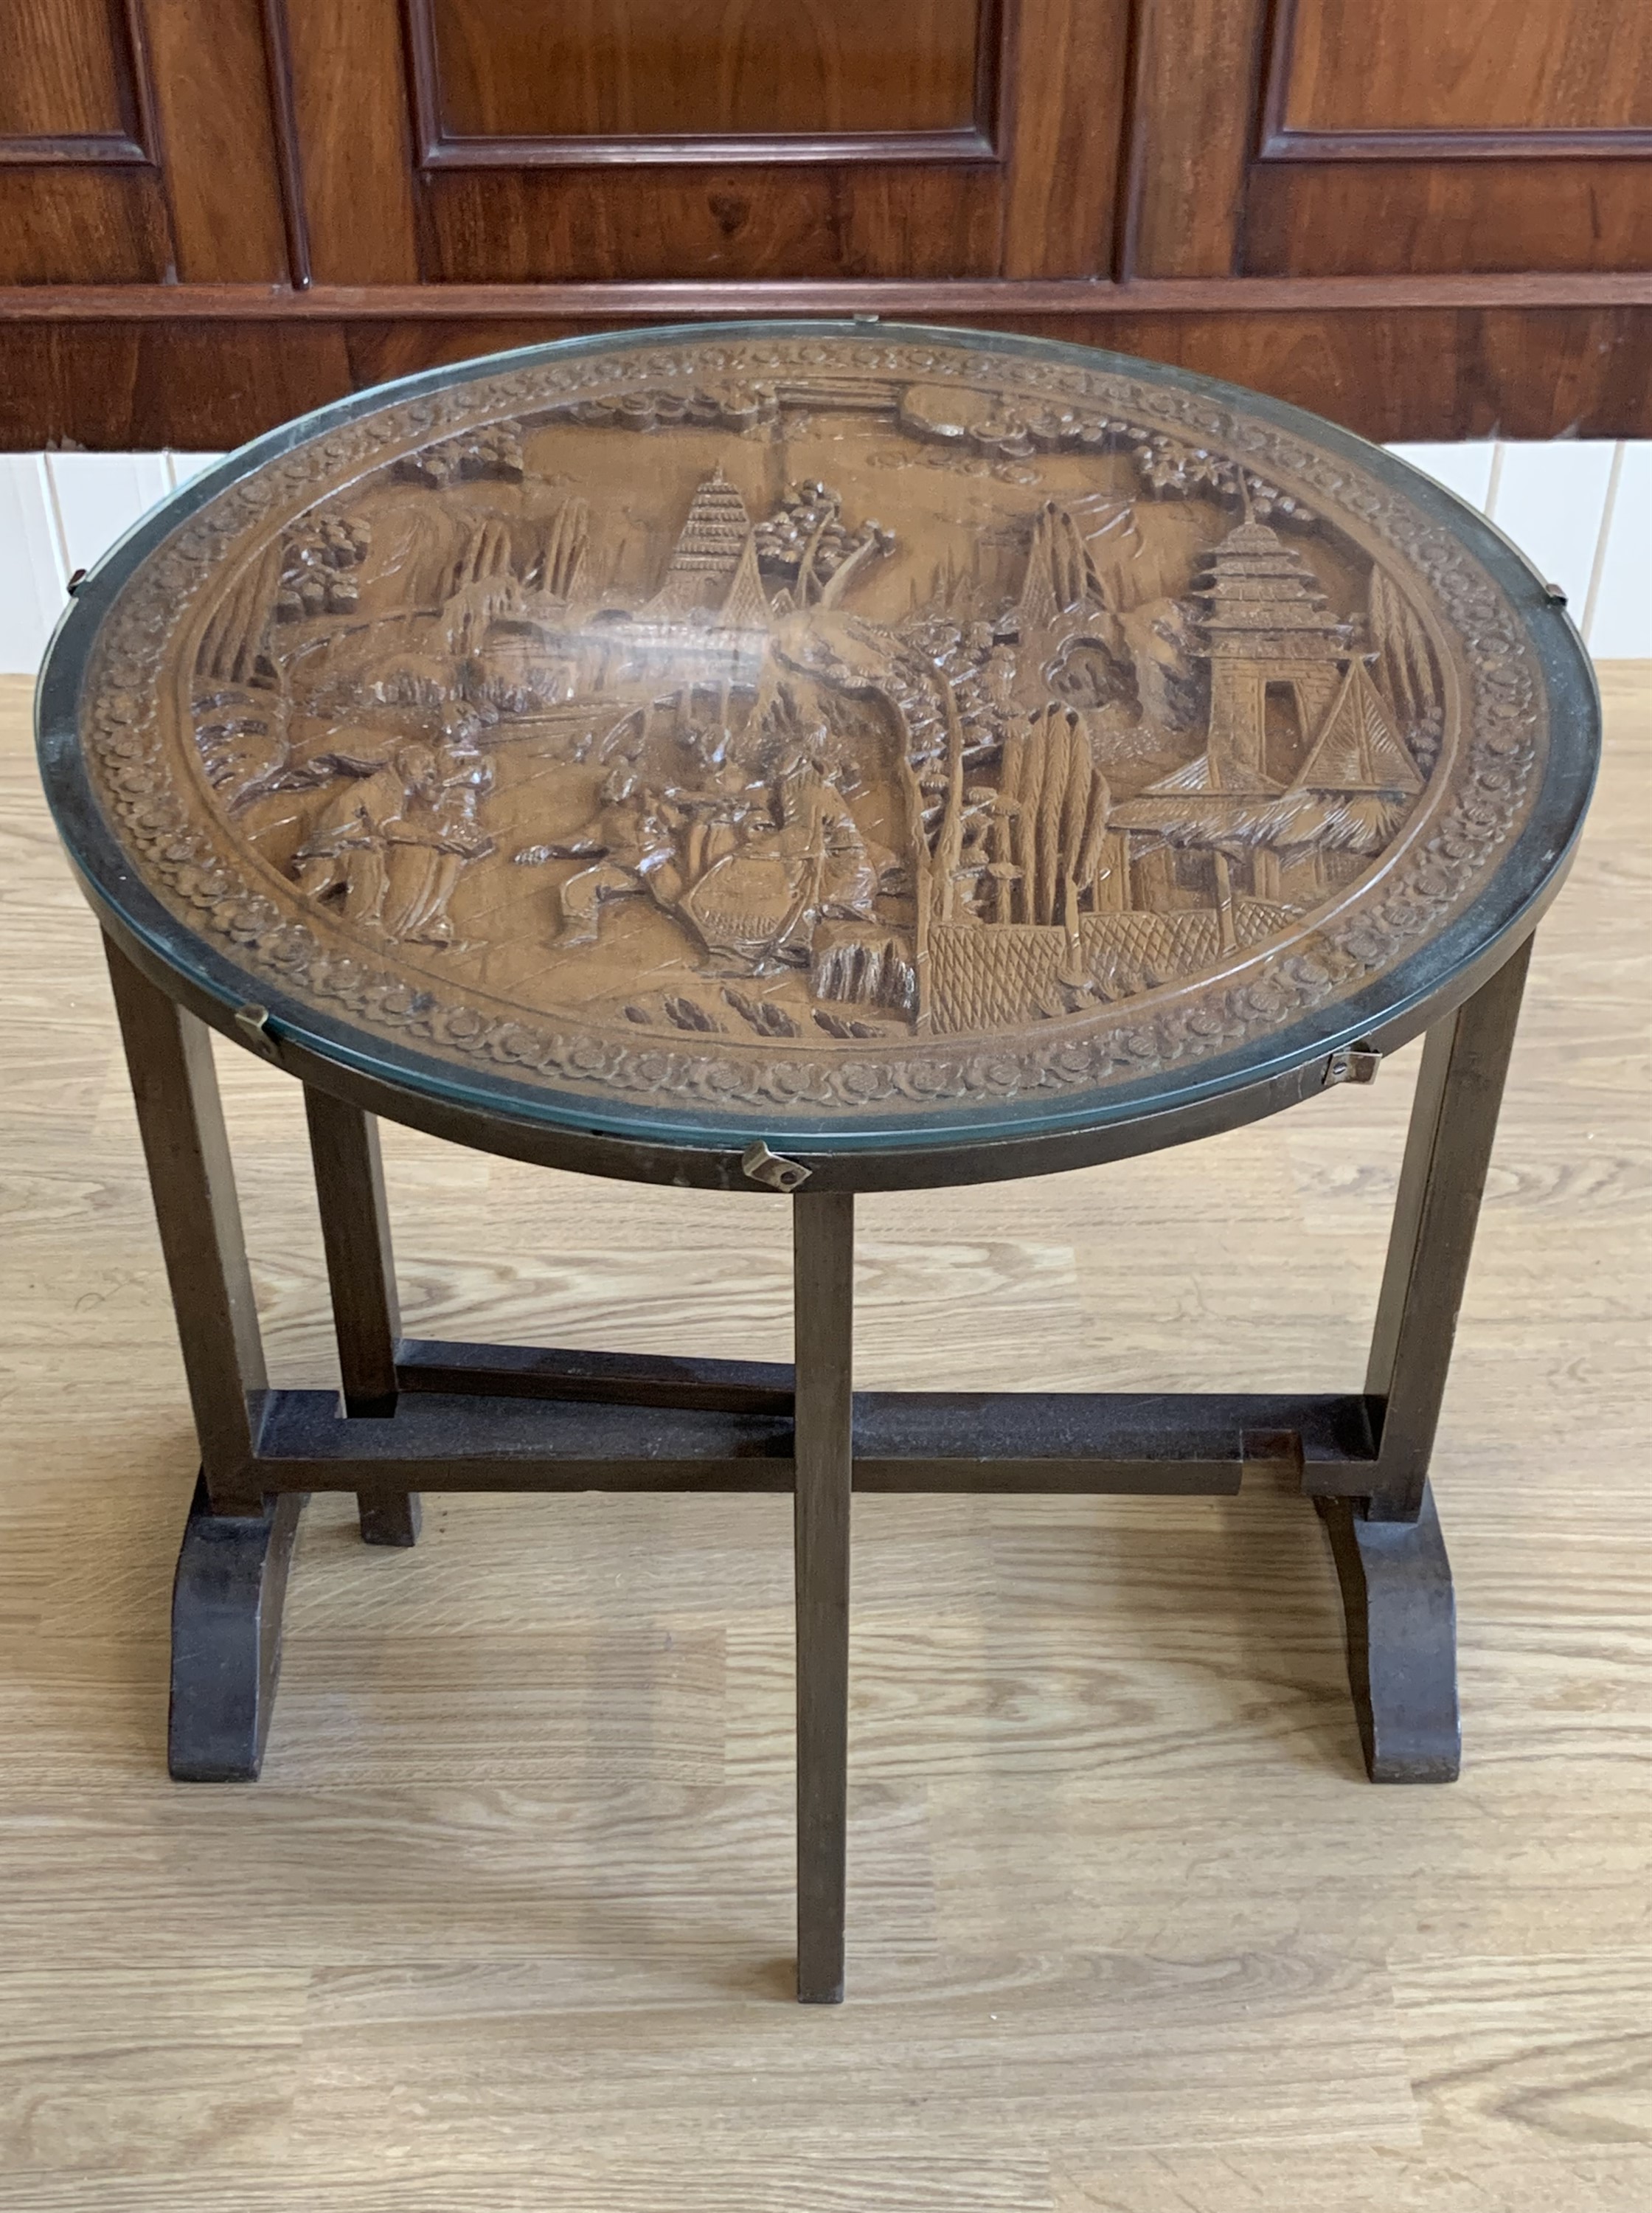 A mid-20th Century Chinese glass-topped carved hardwood folding table / screen, 61 cm x 59 cm